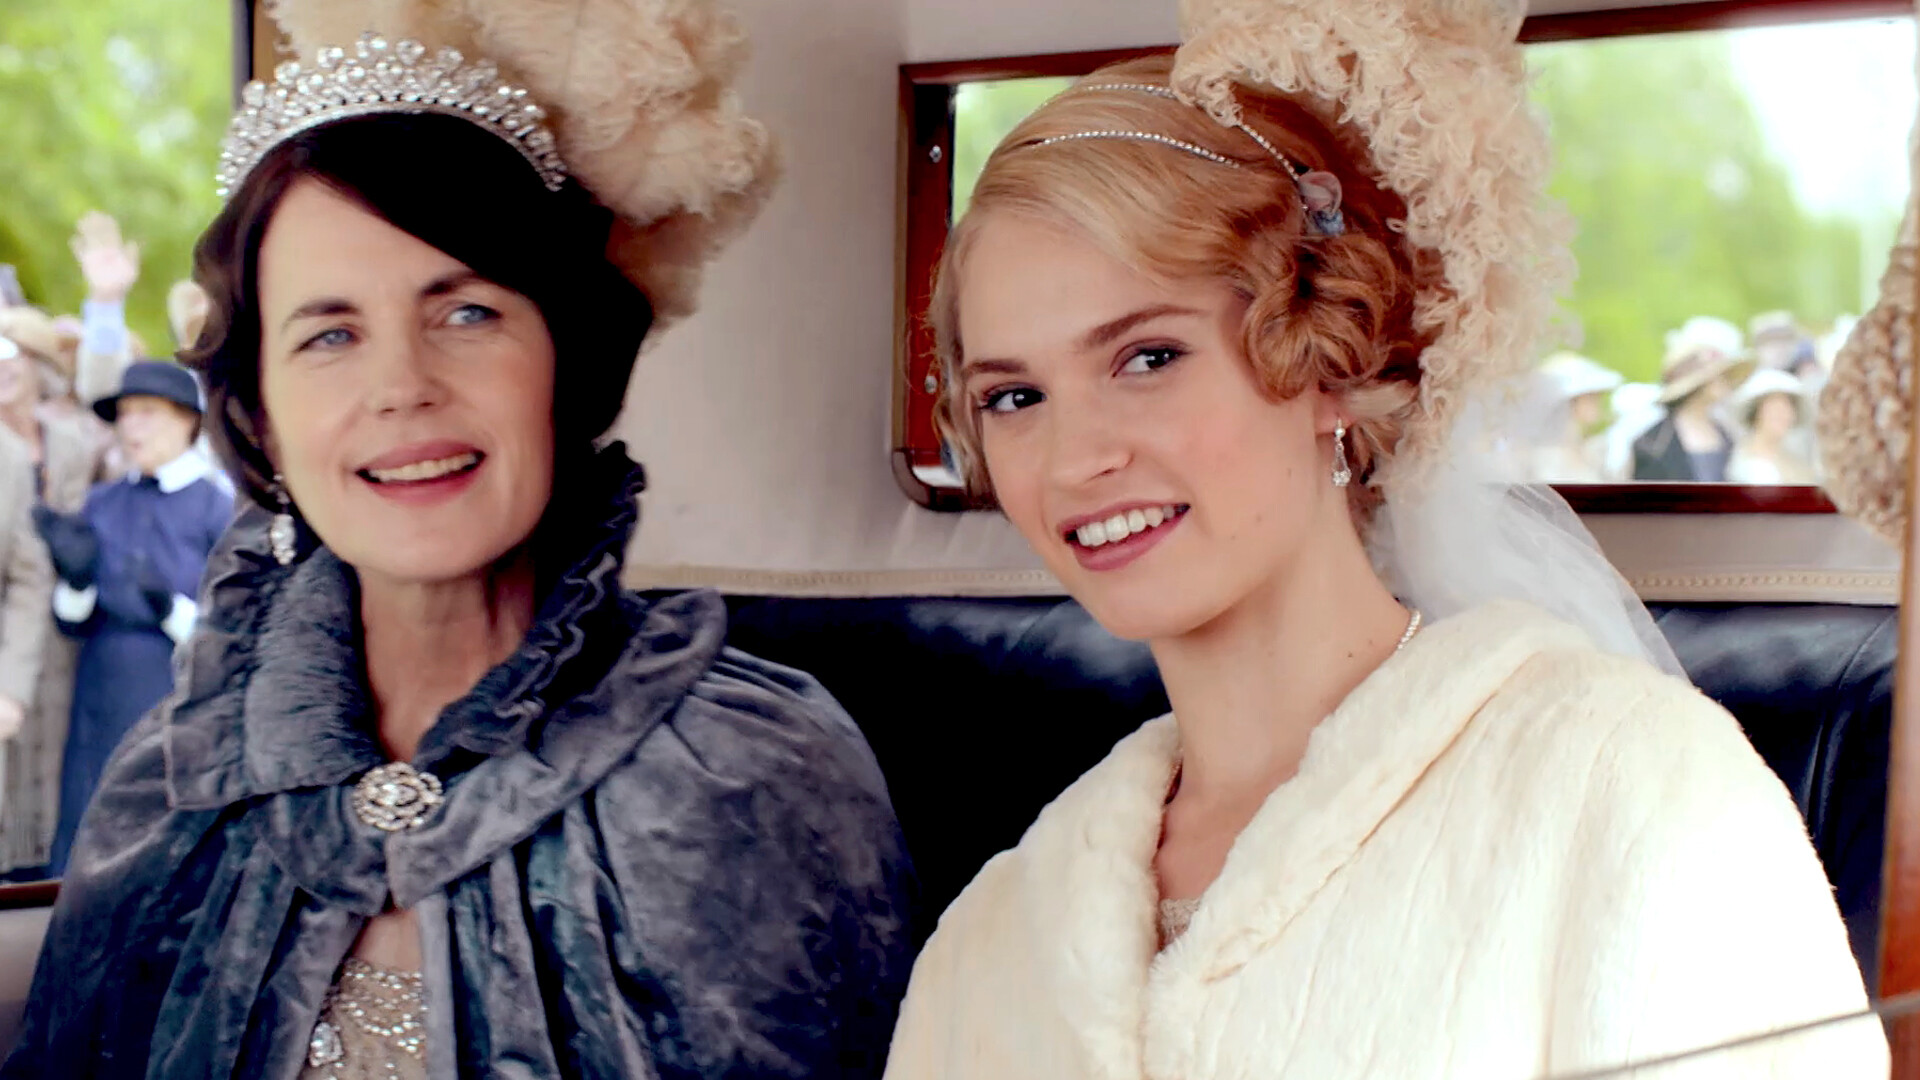 Downton Abbey: Cora Levinson Crawley and Lady Rose MacClare. 1920x1080 Full HD Background.